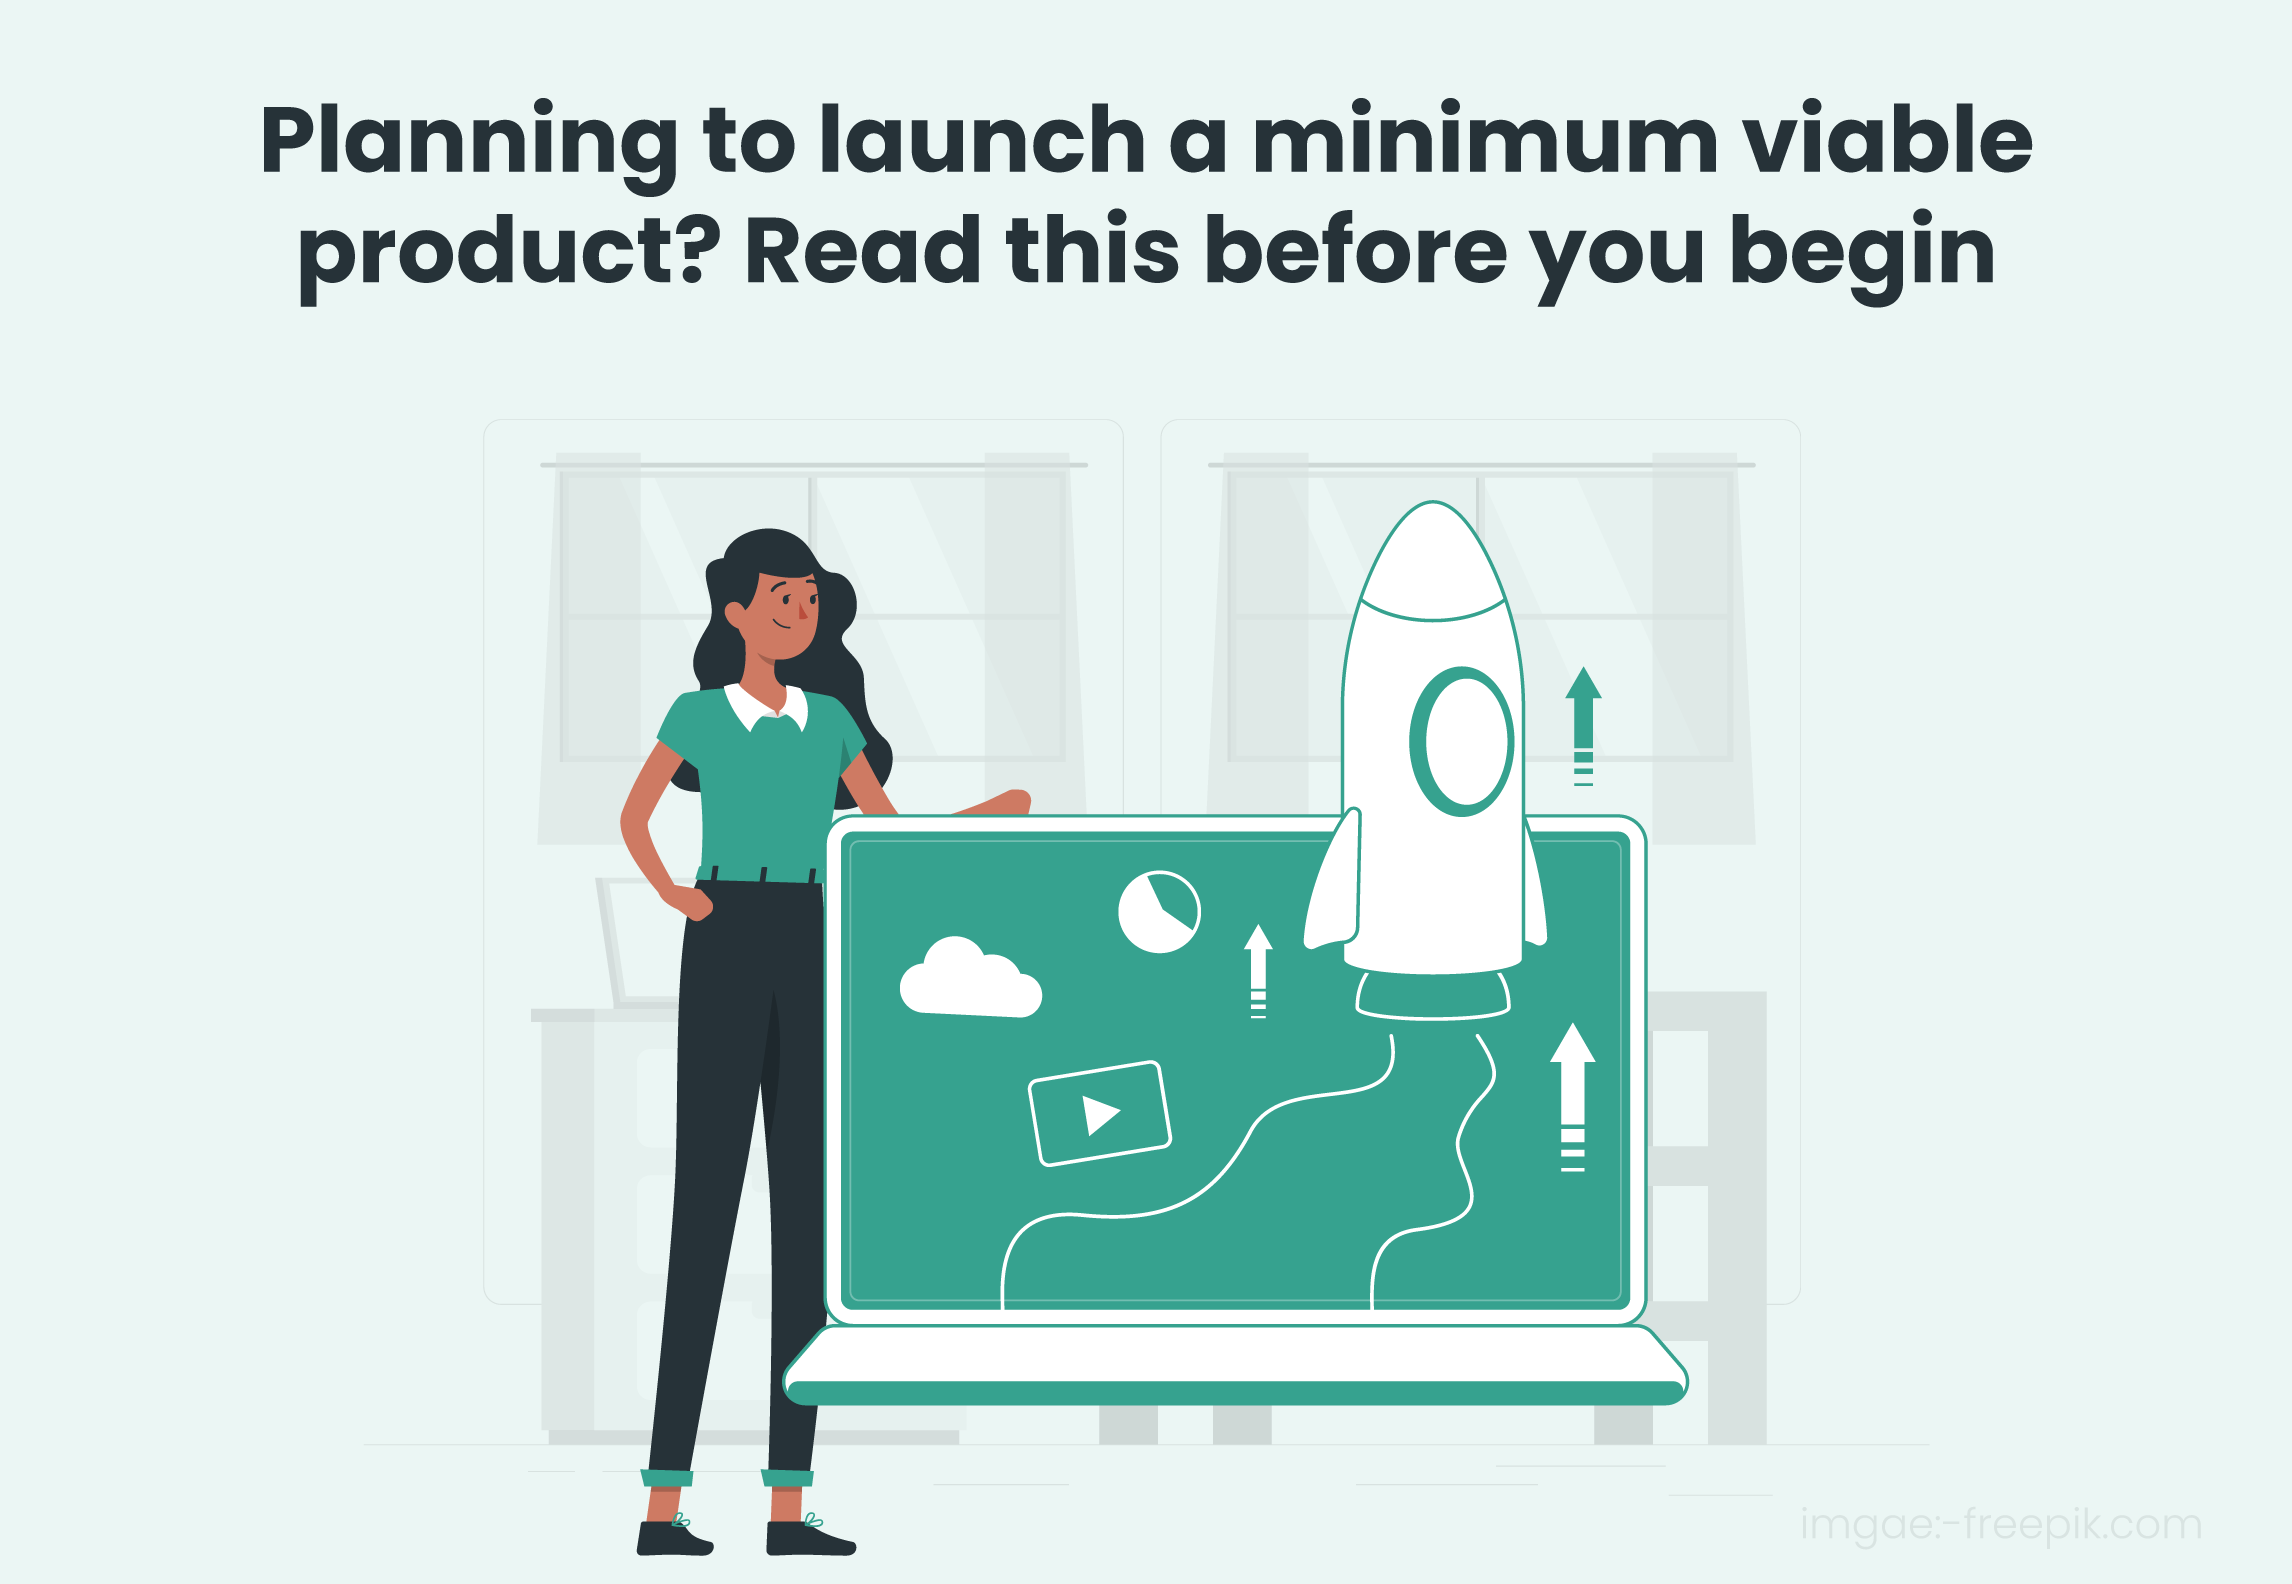 Planning to launch a minimum viable product? Read this before you begin